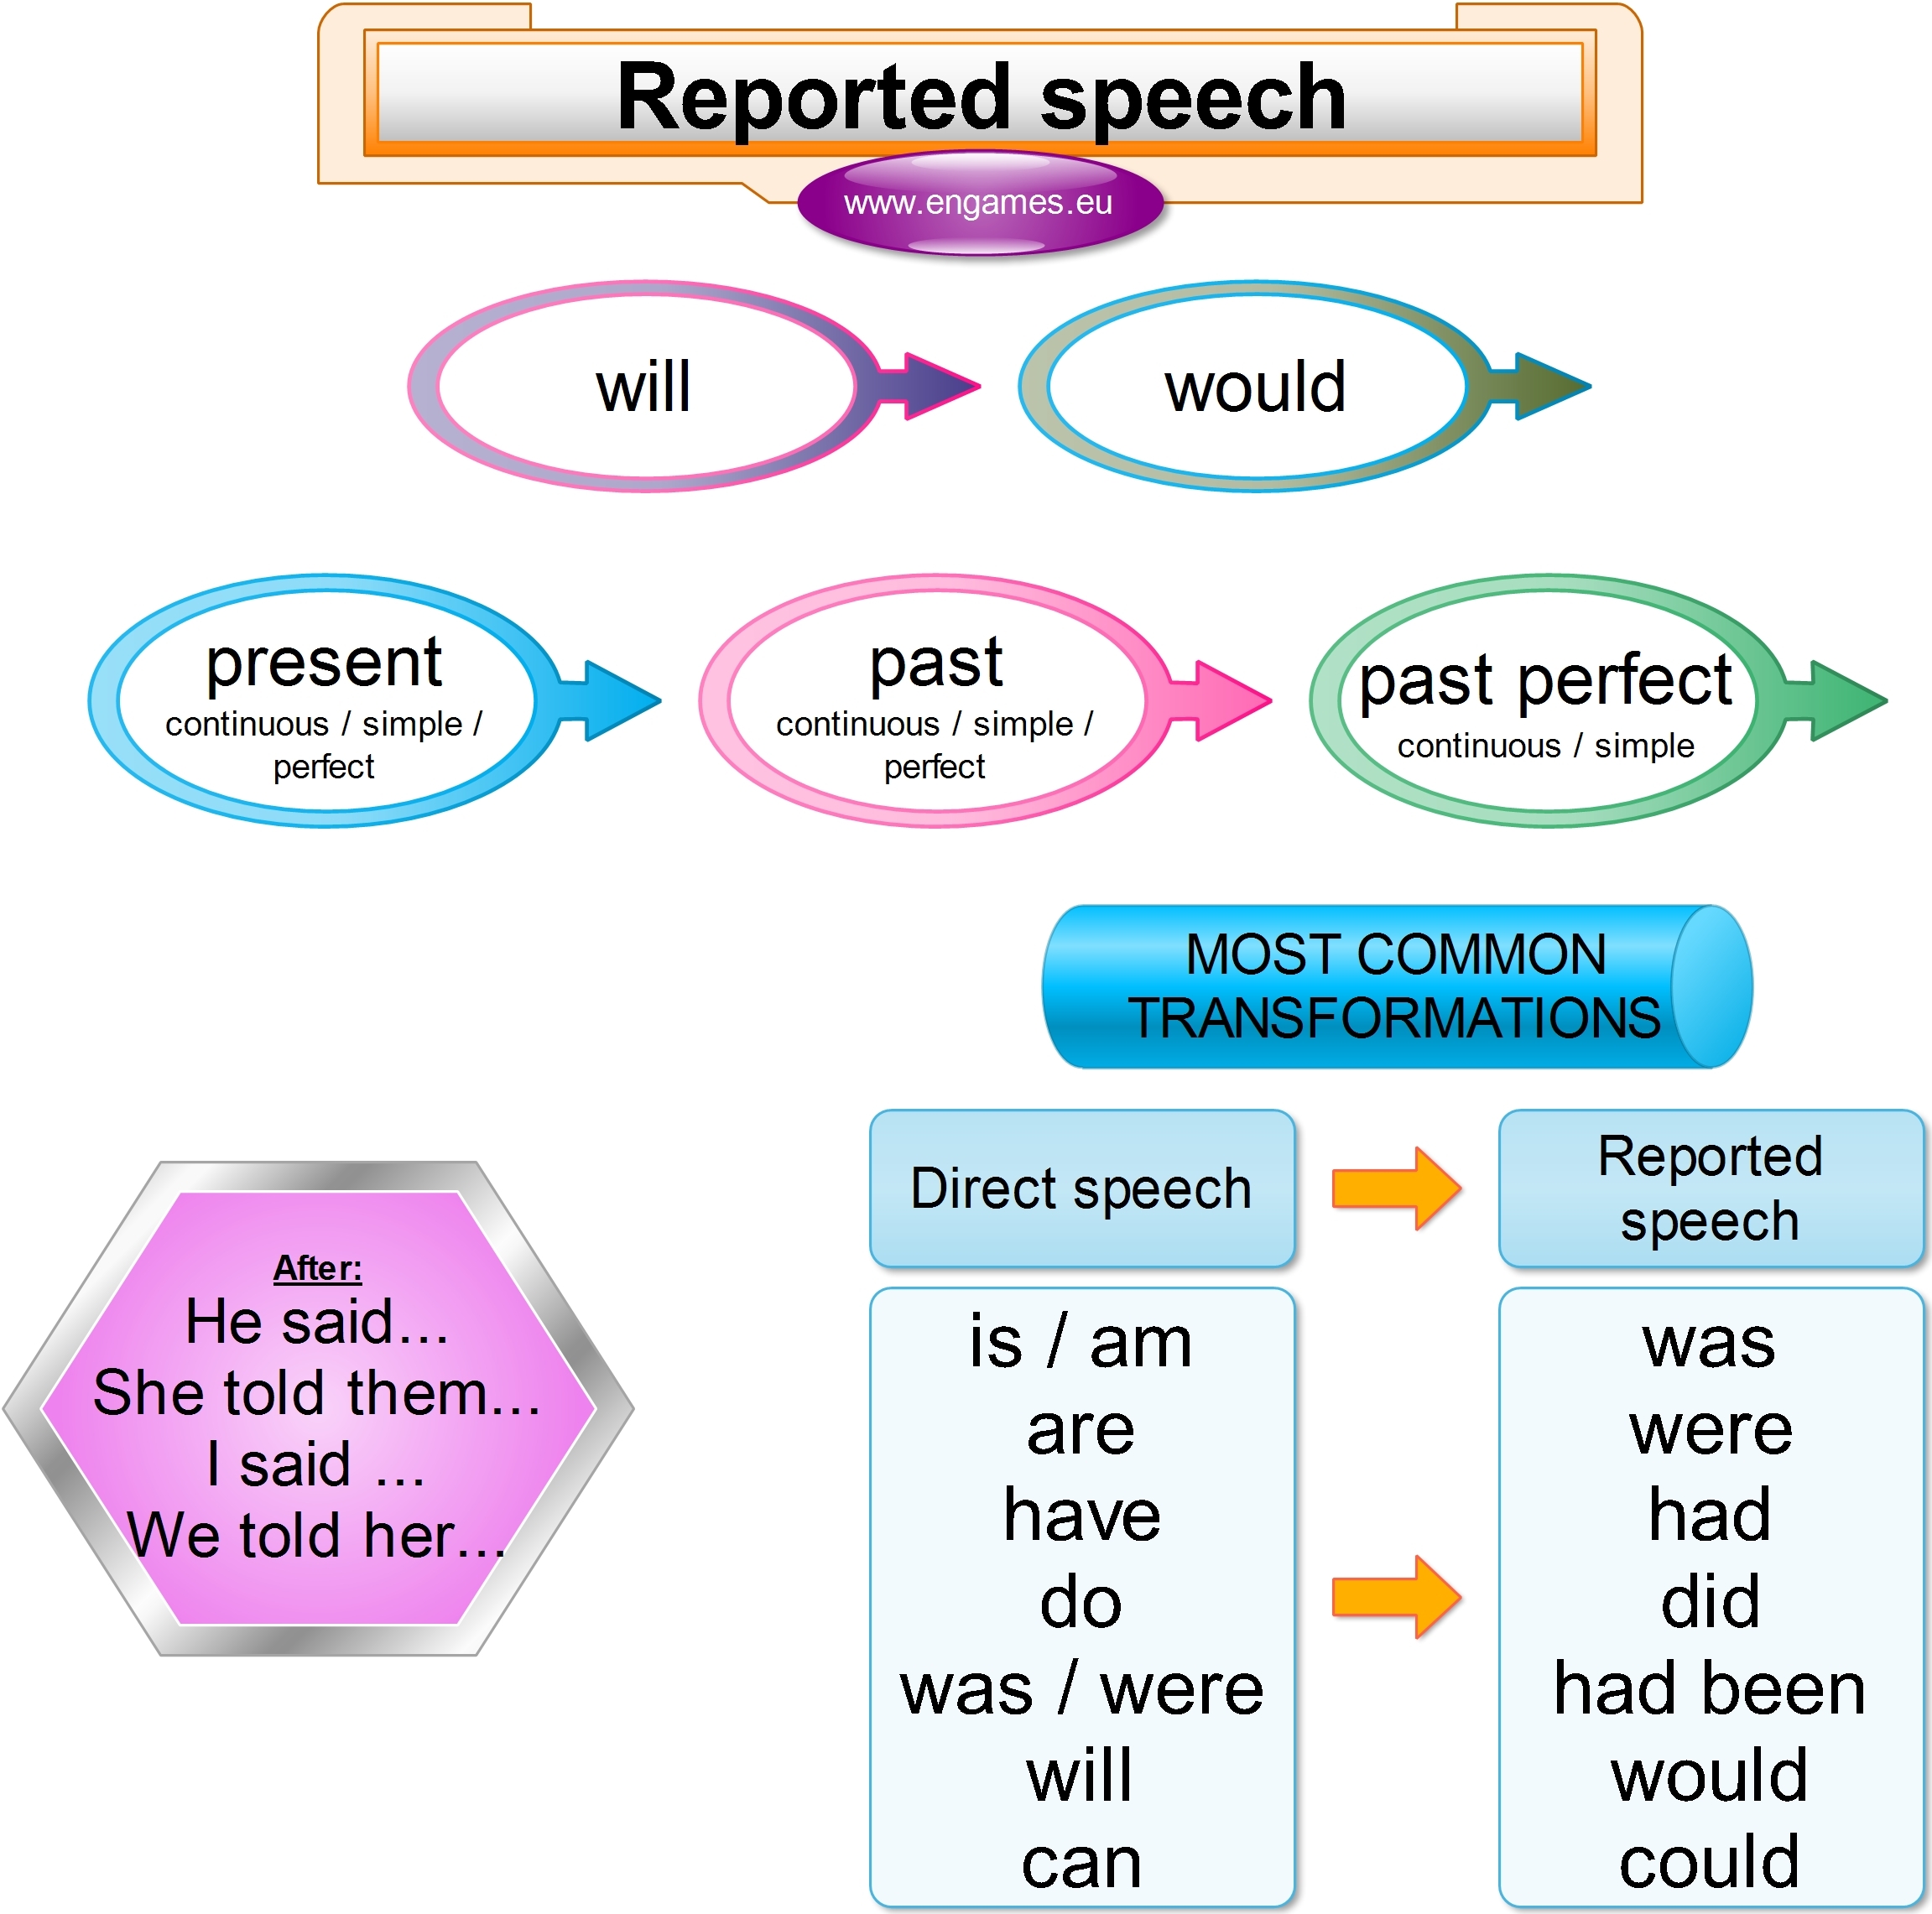 Reported speech infographic - the most common backshifting